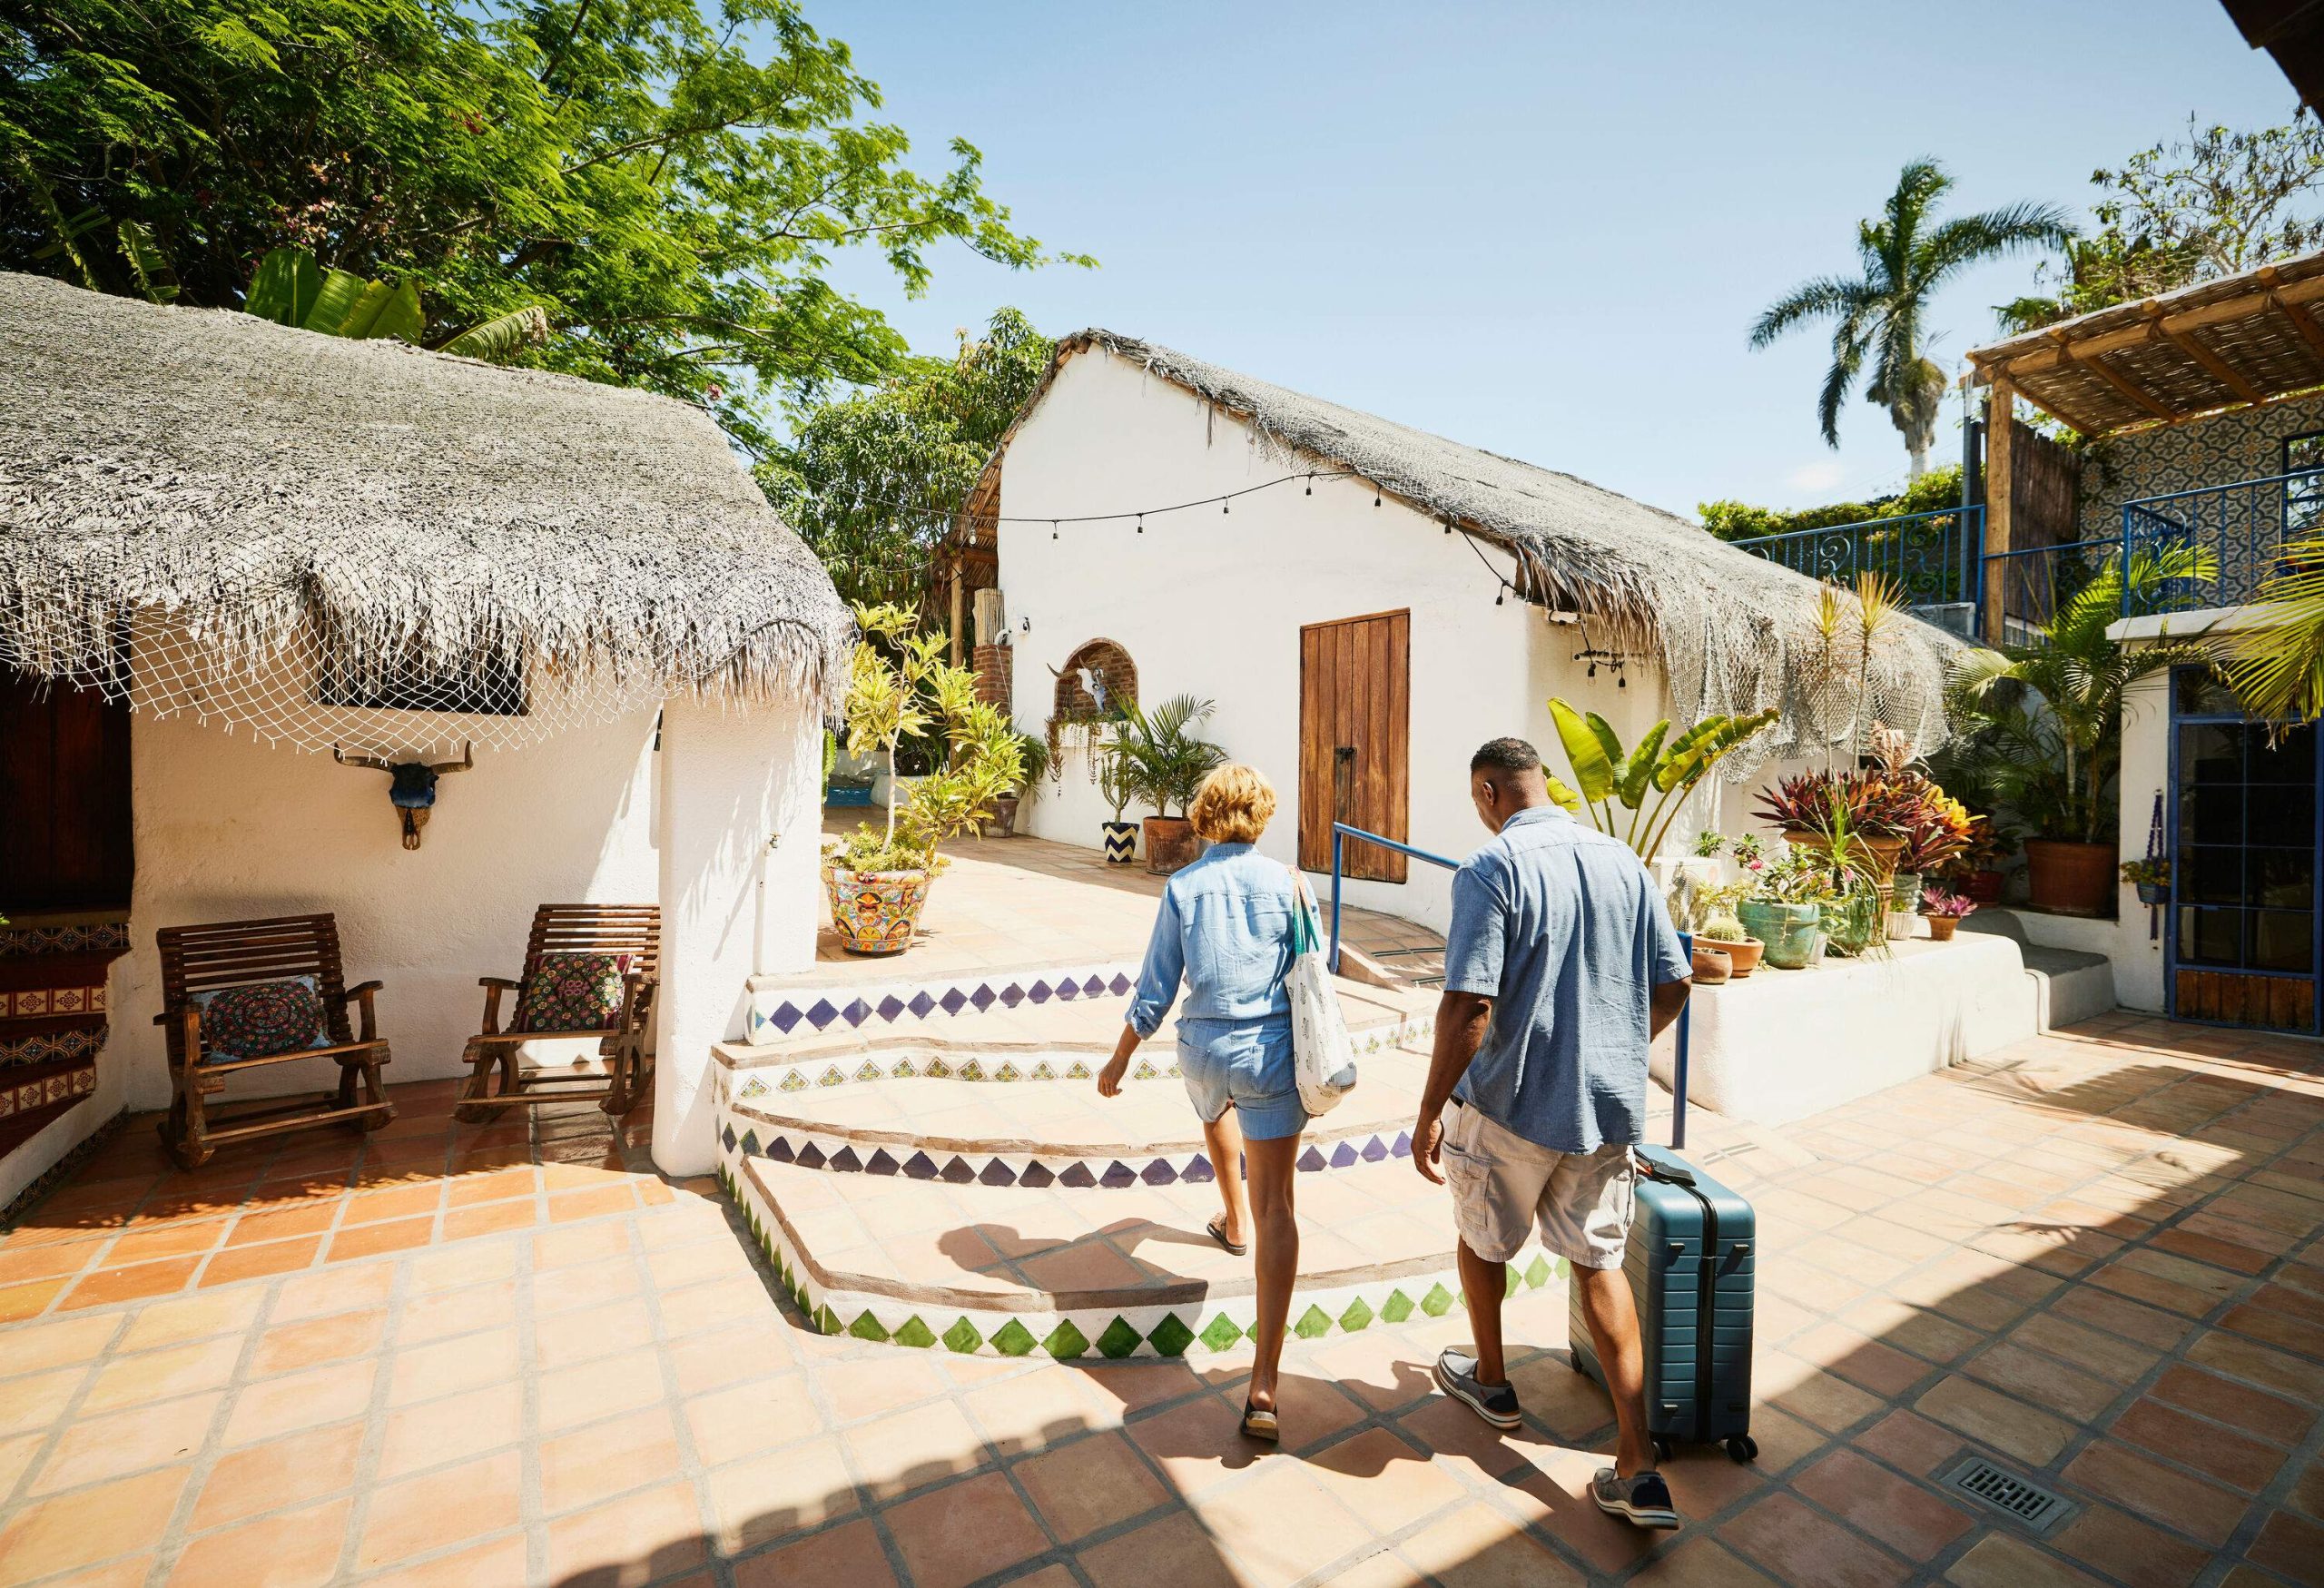 A couple walking across the tiled floor of a resort with their luggage in tow.